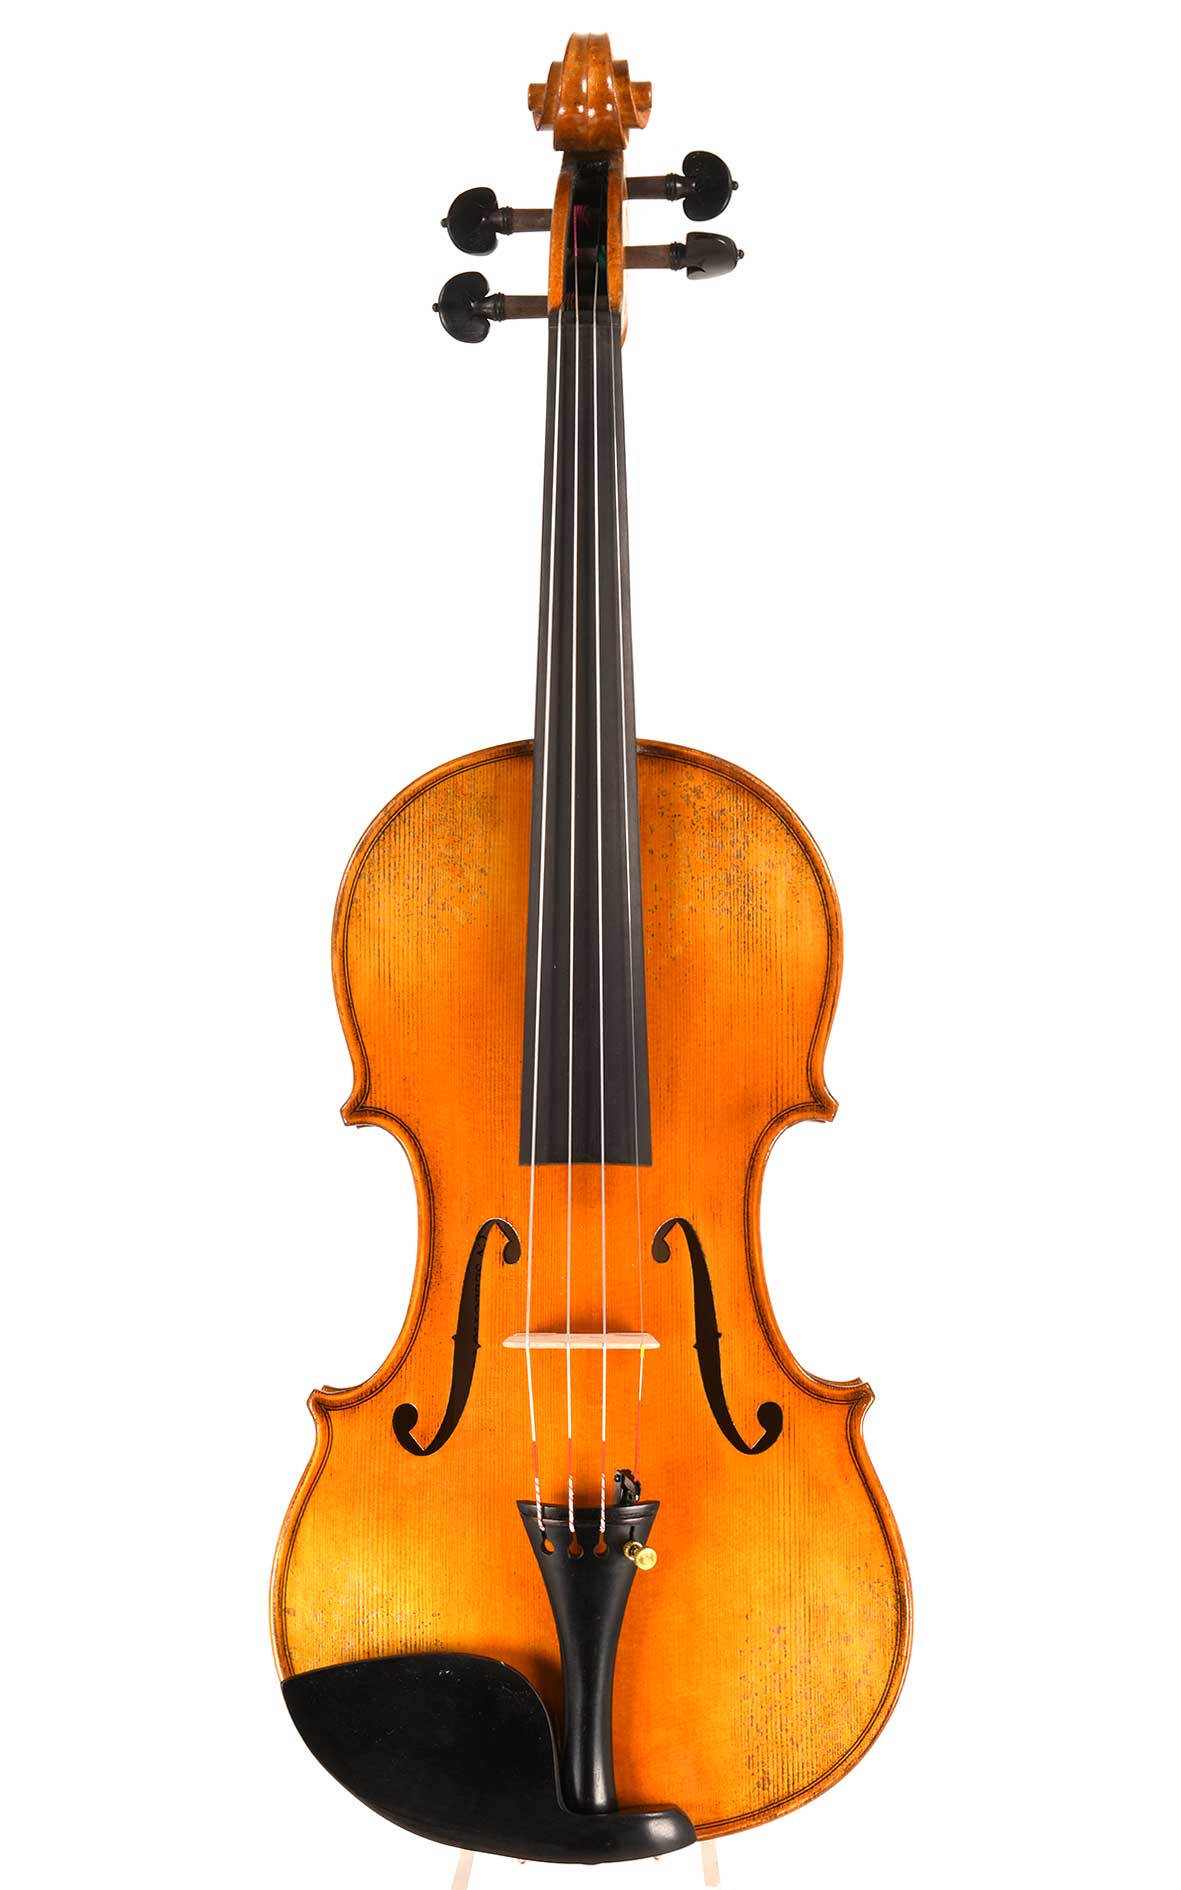 Chinese violins are known for their good sound